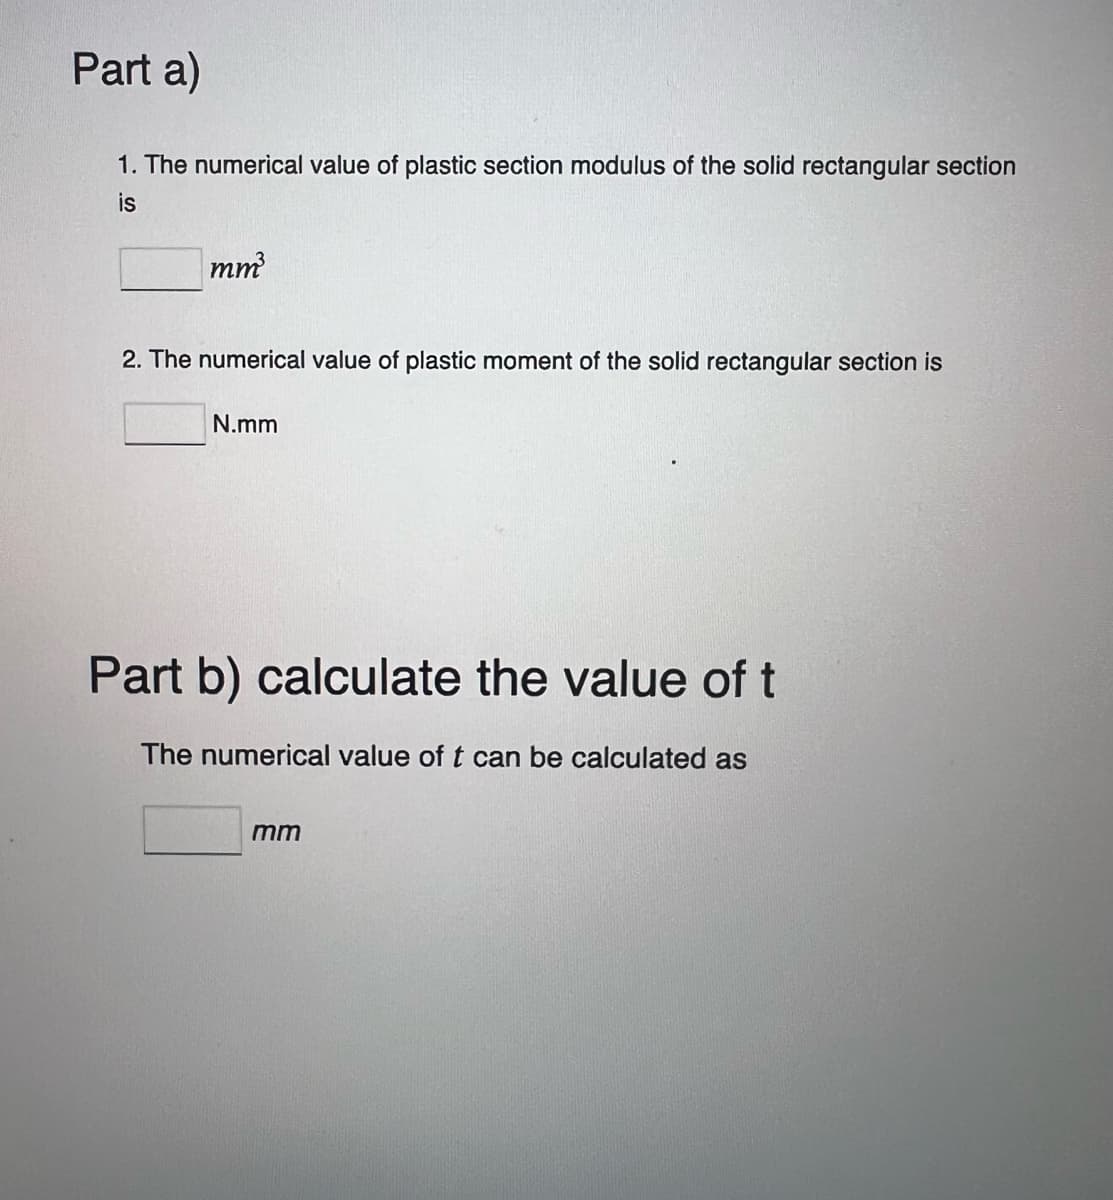 Part a)
1. The numerical value of plastic section modulus of the solid rectangular section
is
mm³
2. The numerical value of plastic moment of the solid rectangular section is
N.mm
Part b) calculate the value of t
The numerical value of t can be calculated as
mm